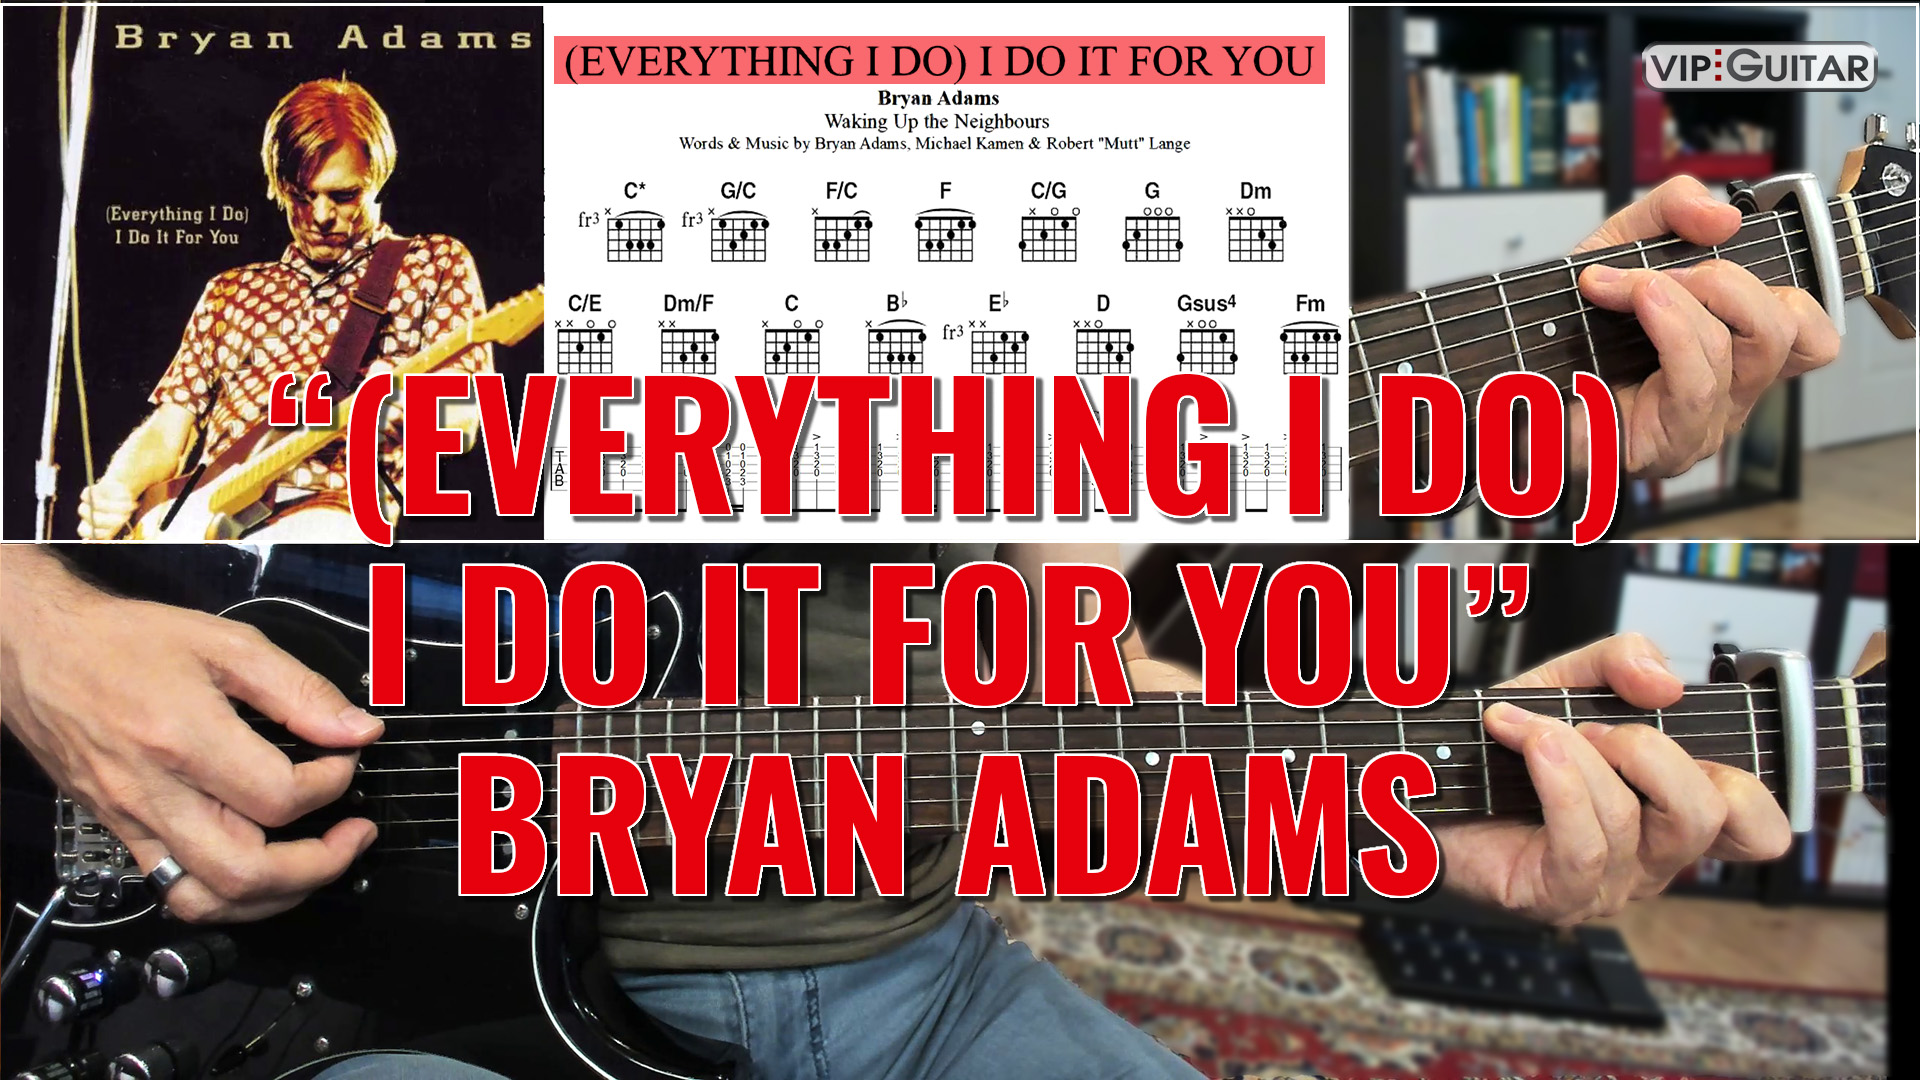 (Everything I Do - I Do It For You - Bryan Adams